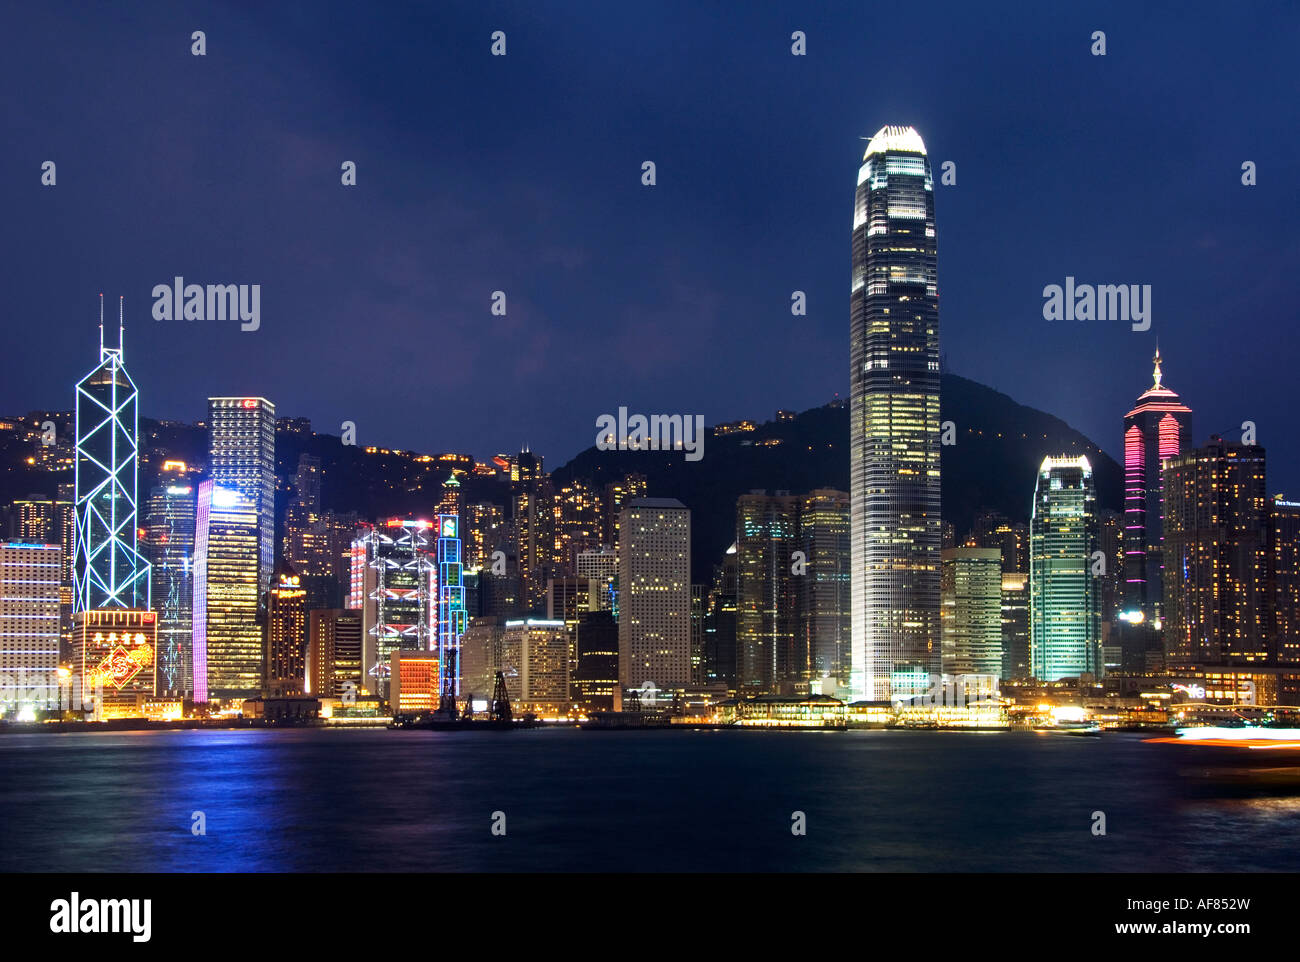 Night View of the famous Hong Kong Skyline seen from the Kowloon Side of the Harbour, Hong Kong, China, Asia Stock Photo